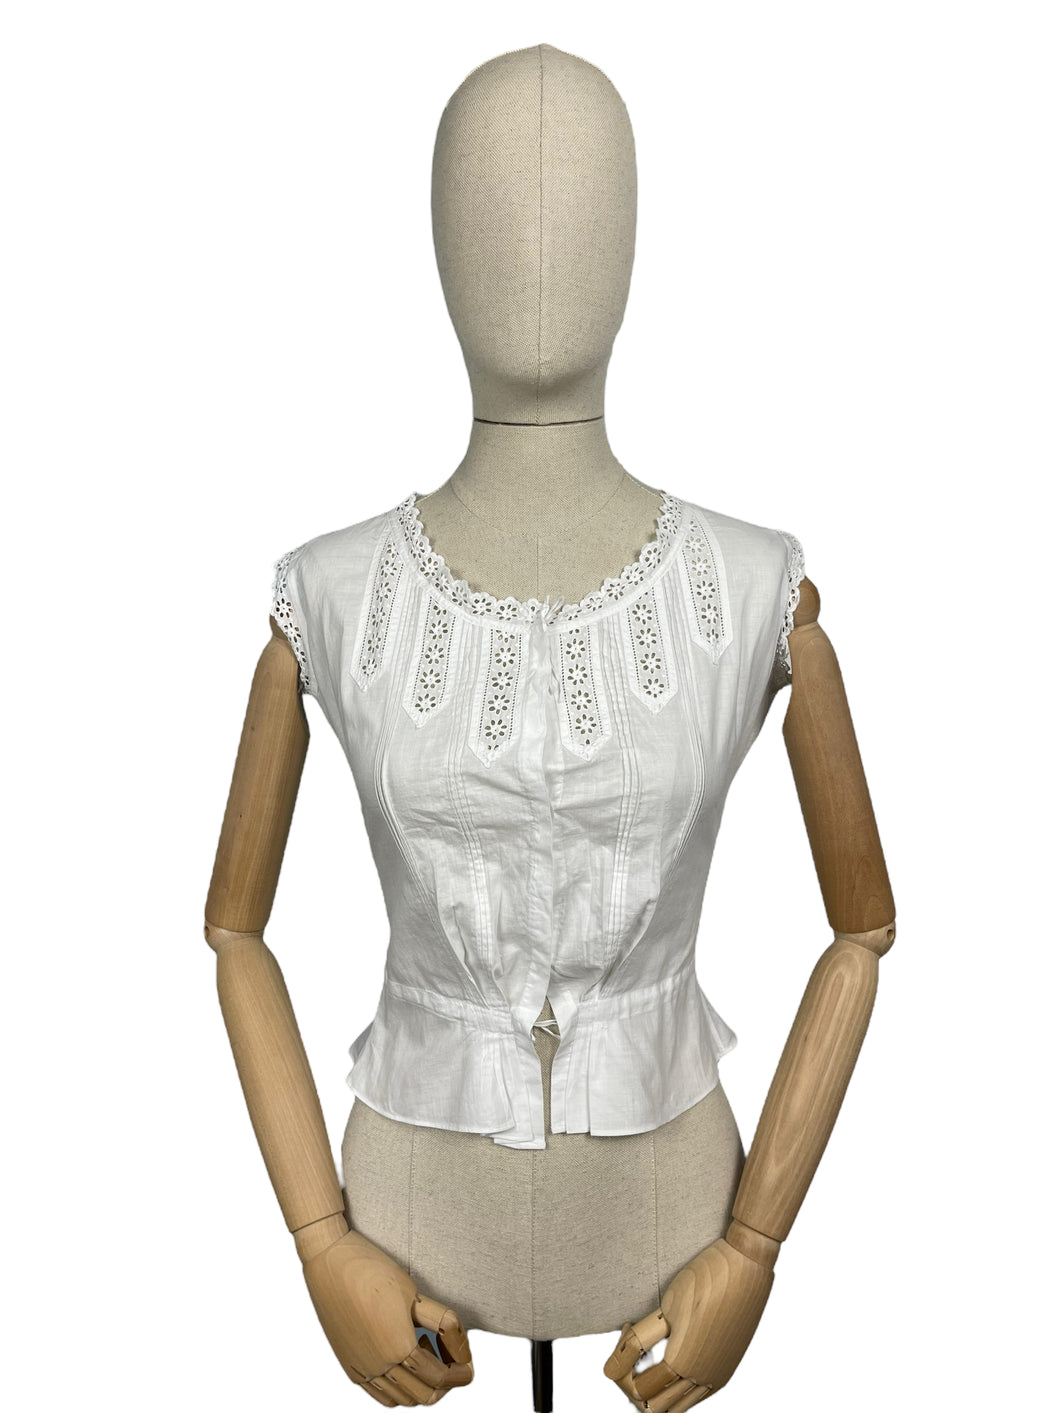 Antique White Cotton Chemise with Broderie Anglaise, Pintucks, Tie Waist and Yoke, Mother of Pearl Buttons - Bust 32 34 *